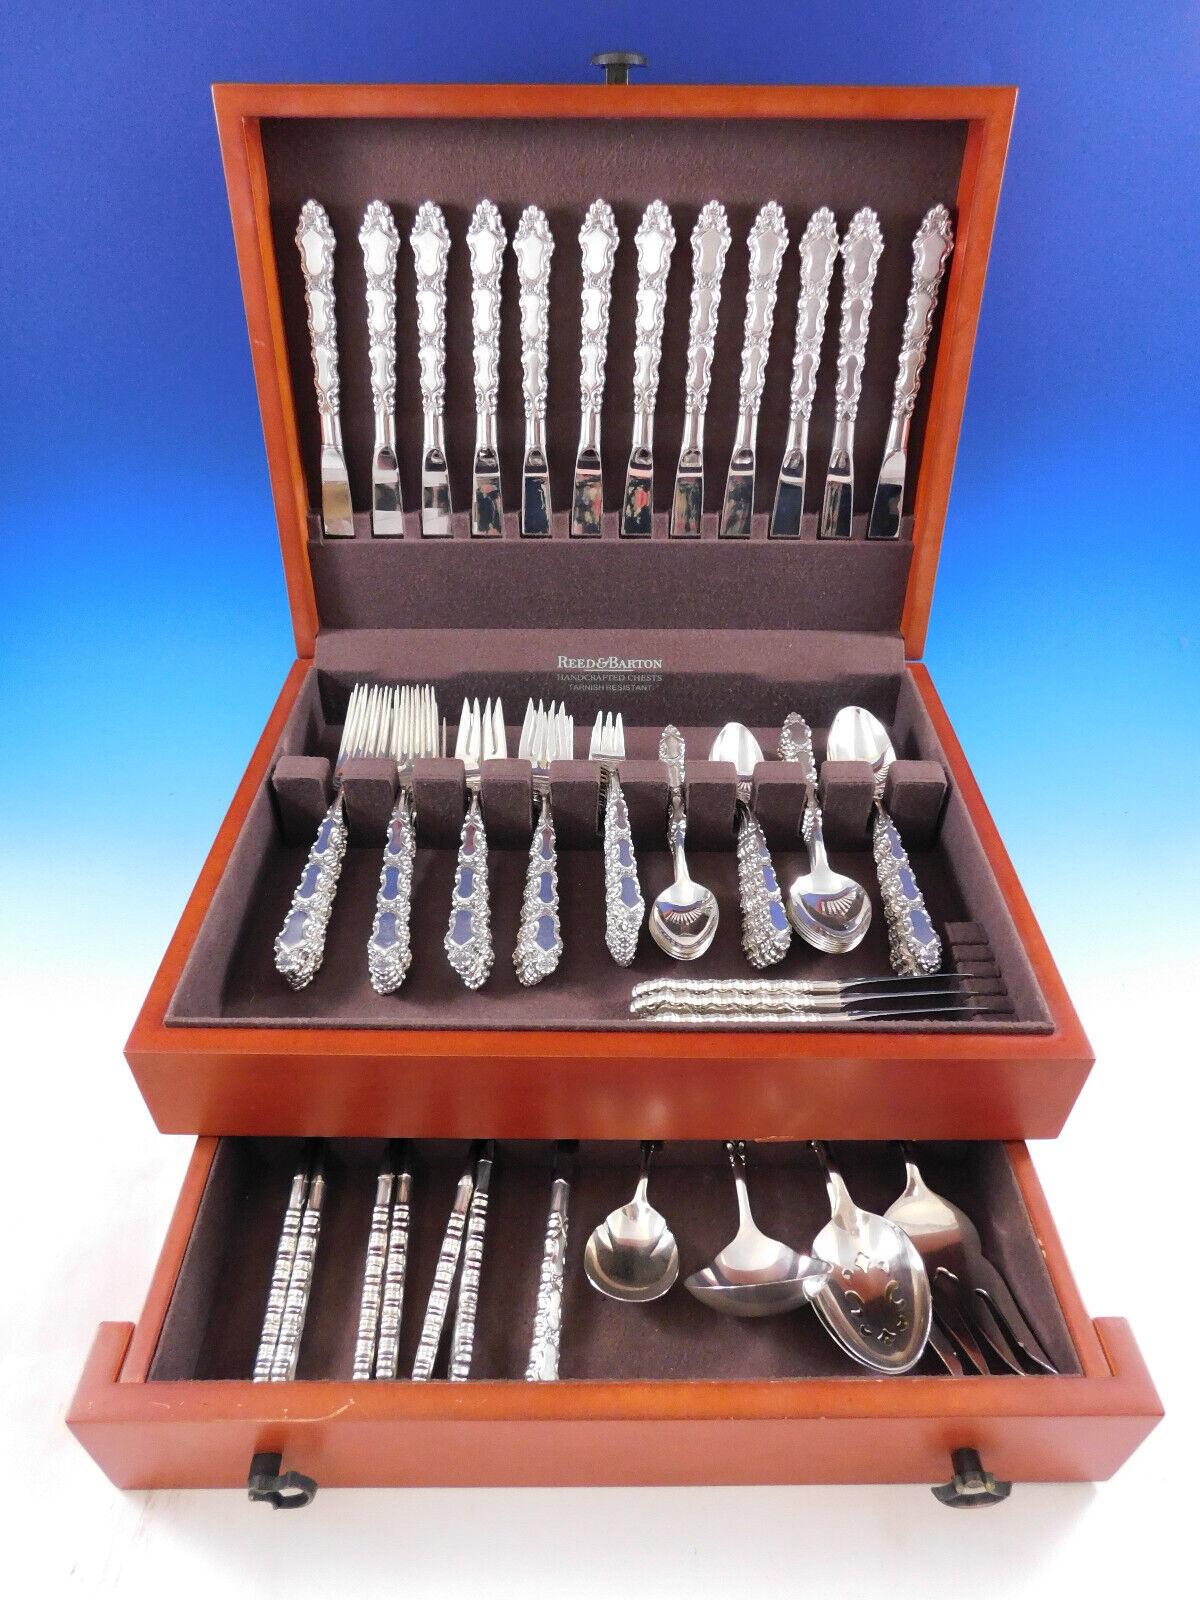 
Scarce Grand Trianon by International circa 1975 sterling silver Flatware set, 90 pieces. This set includes:

12 Knives, 9 1/8